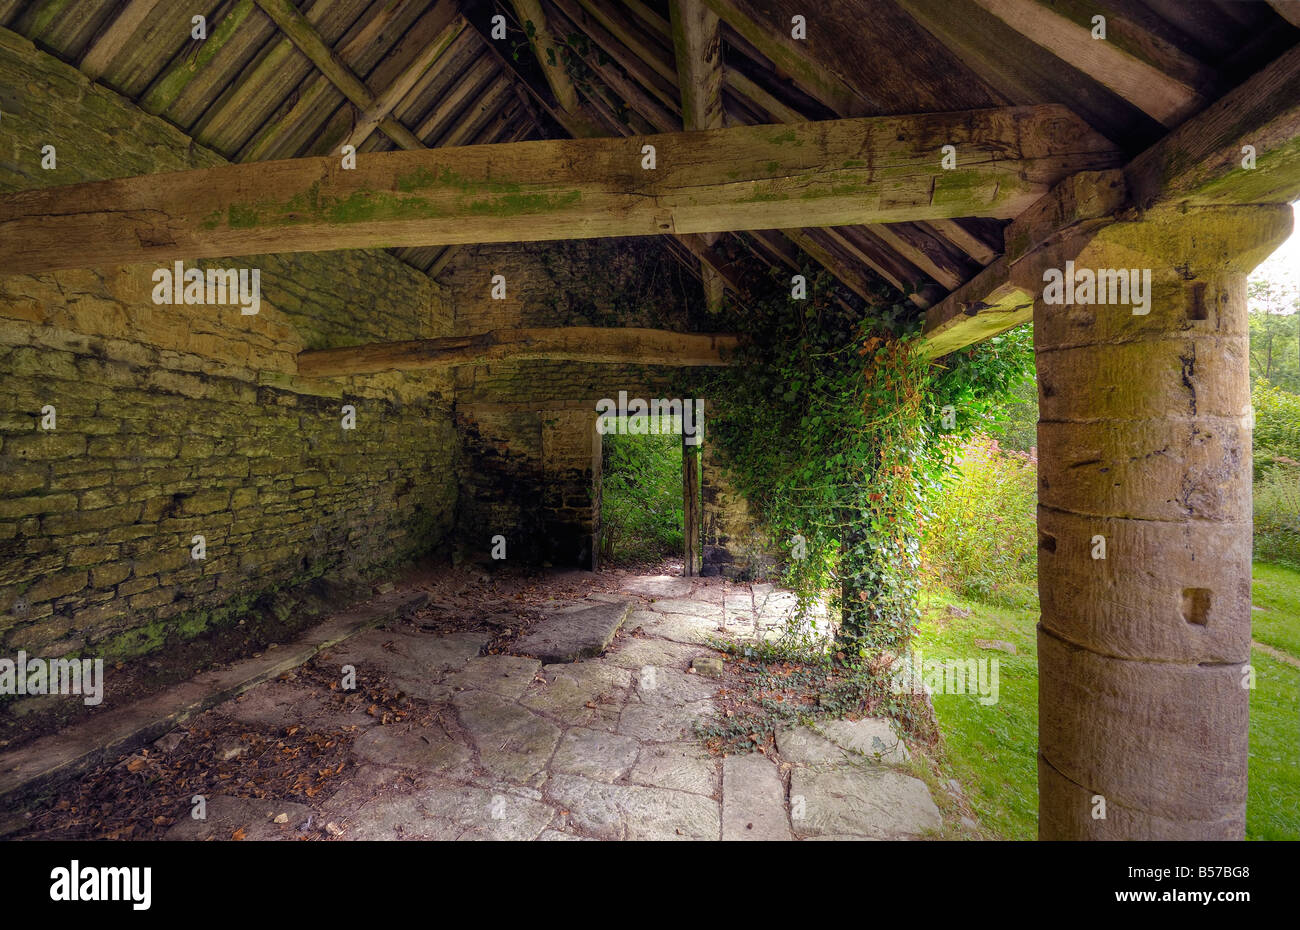 The Old Kennels Woodchester Park Interior showing roof construction Stock Photo